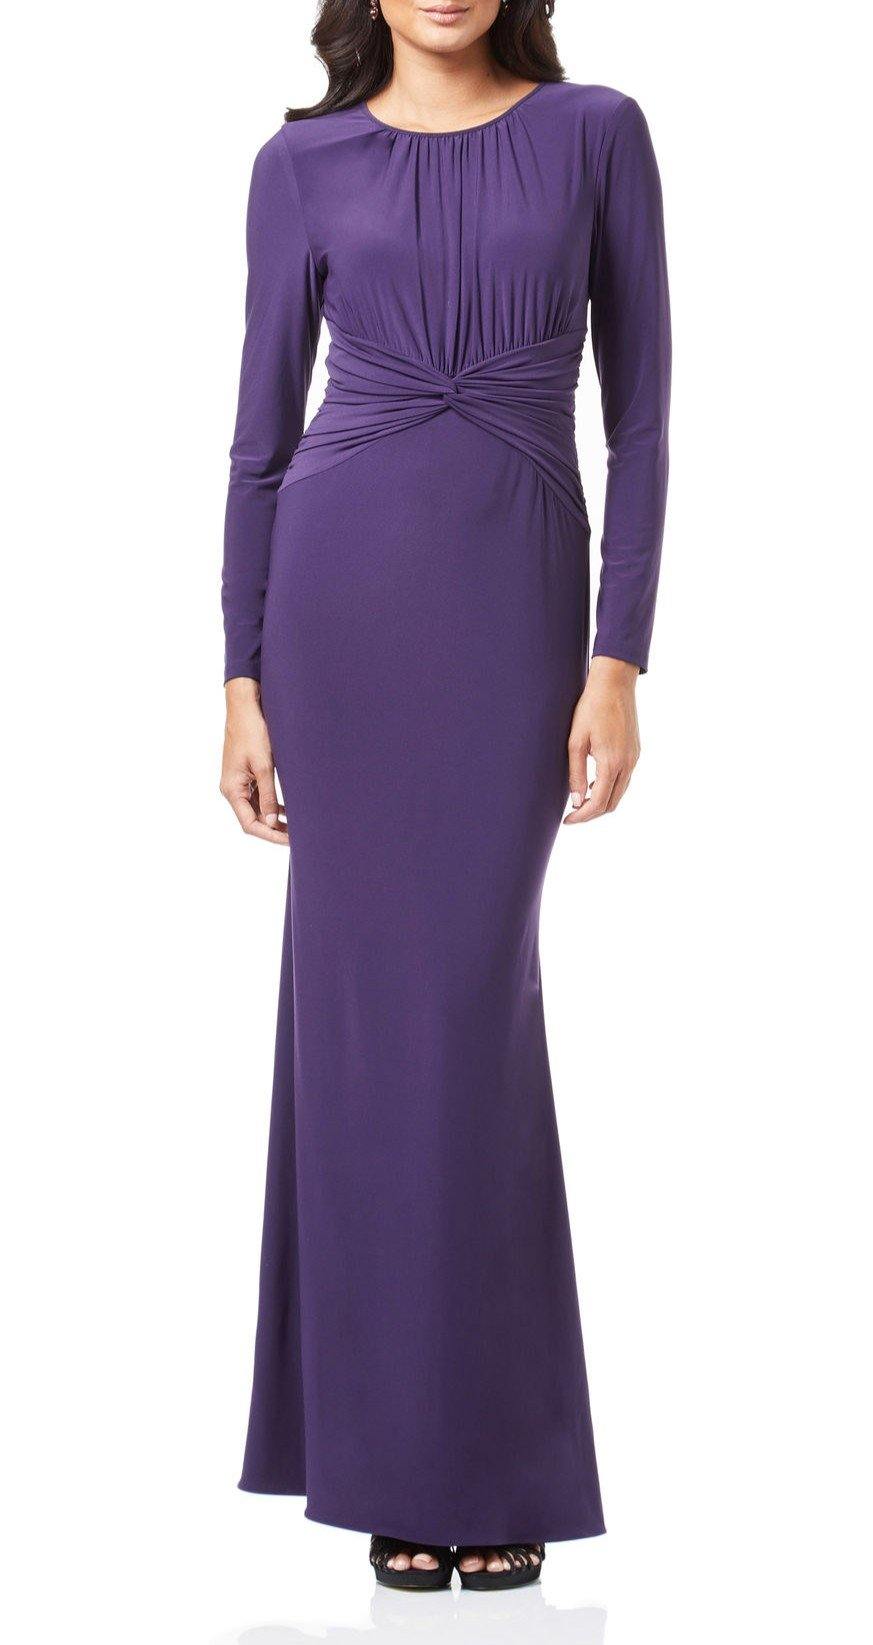 Adrianna Papell Long Sleeve Formal Dress - The Dress Outlet Adrianna Papell